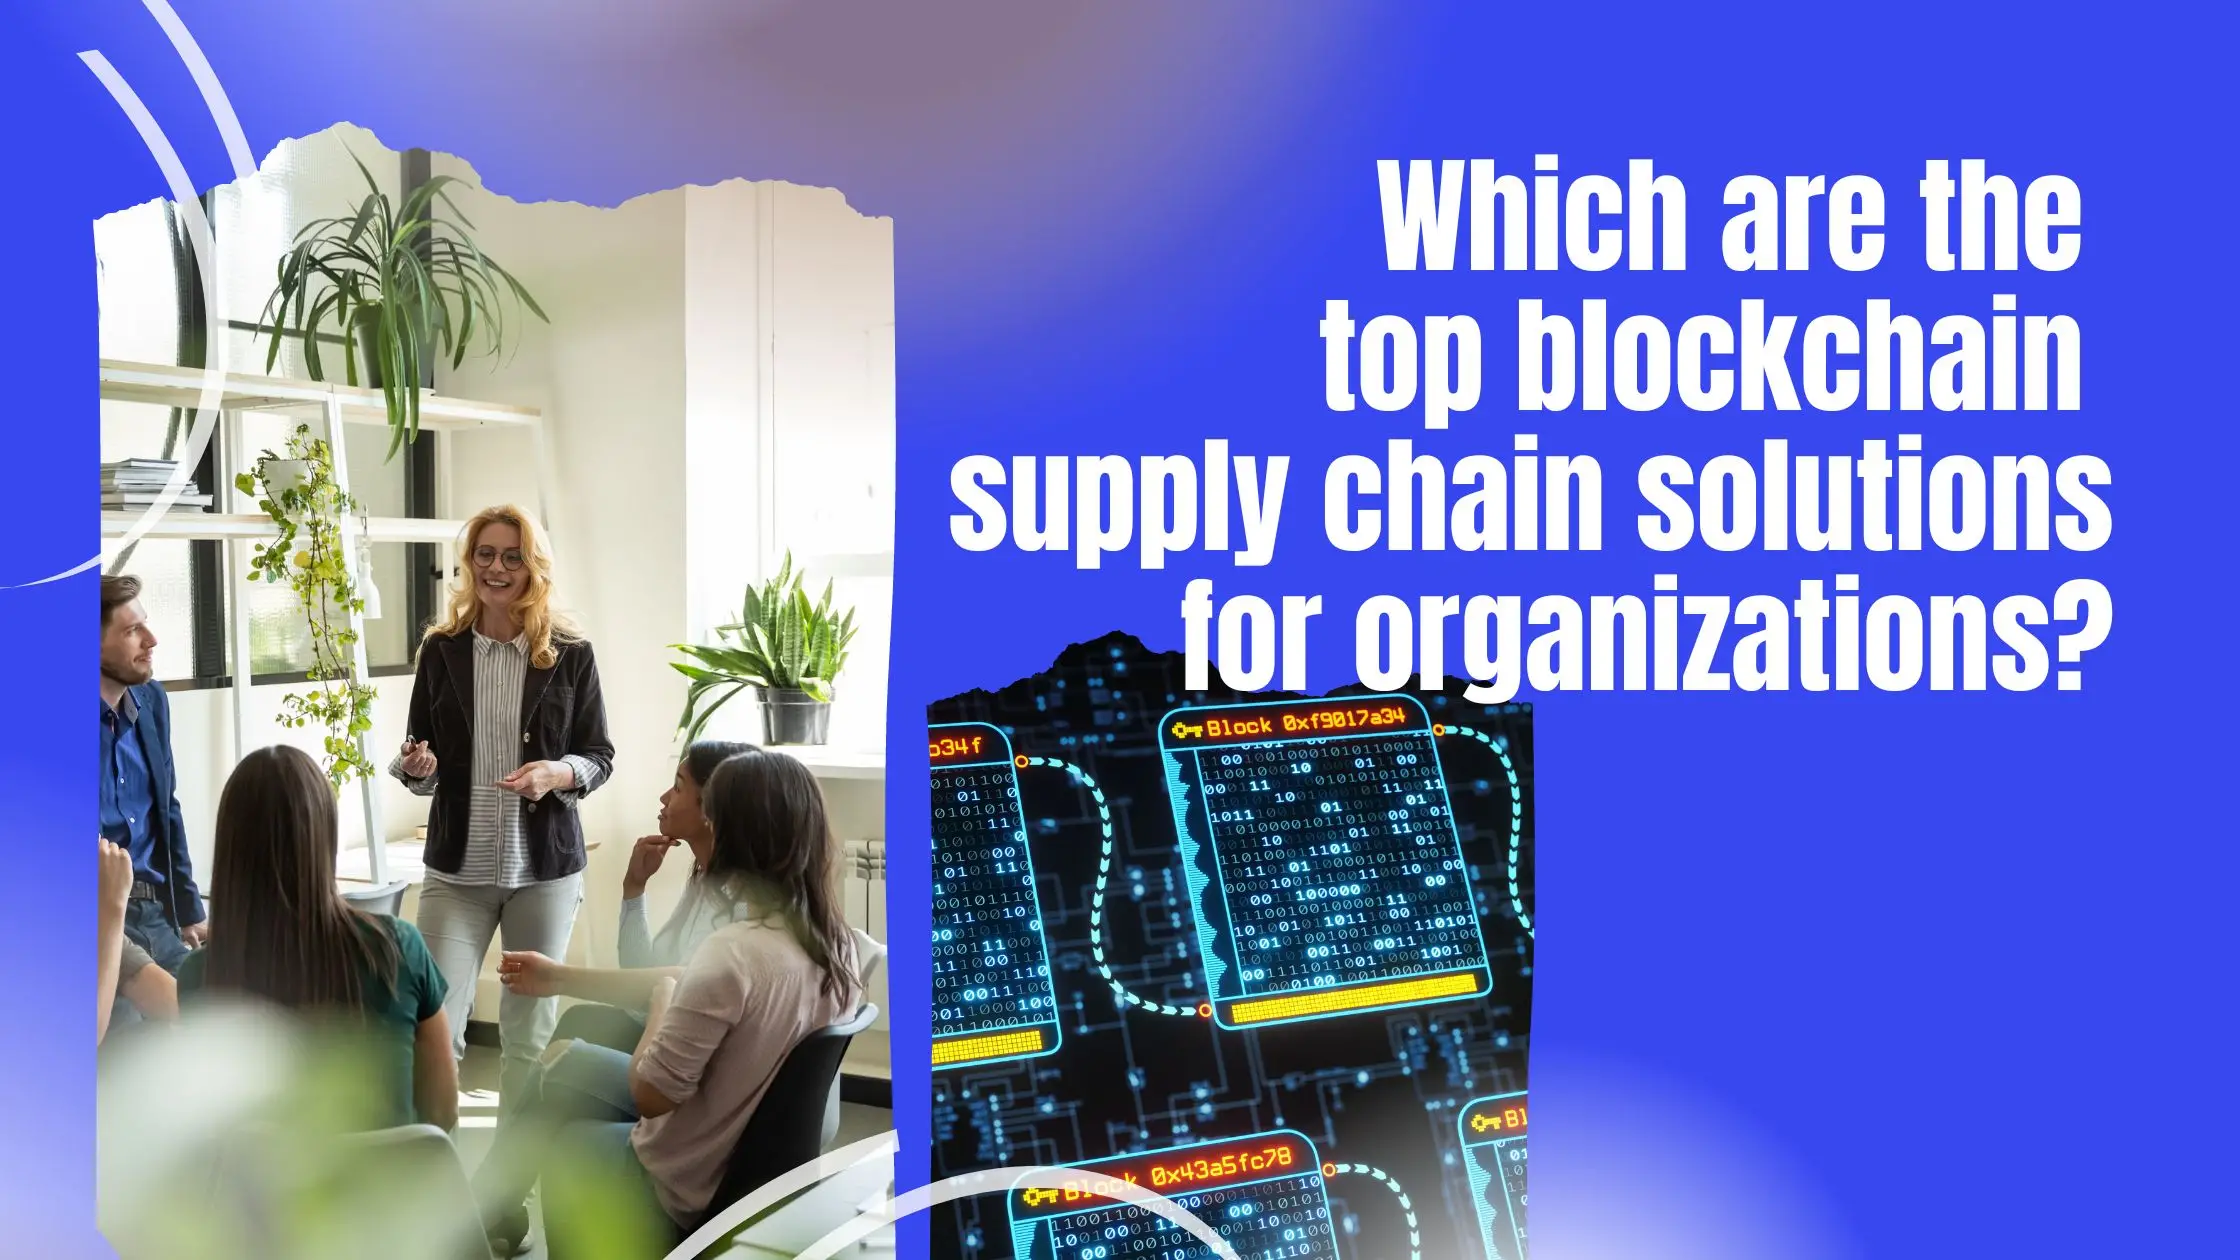 Which are the top blockchain supply chain solutions for organizations?